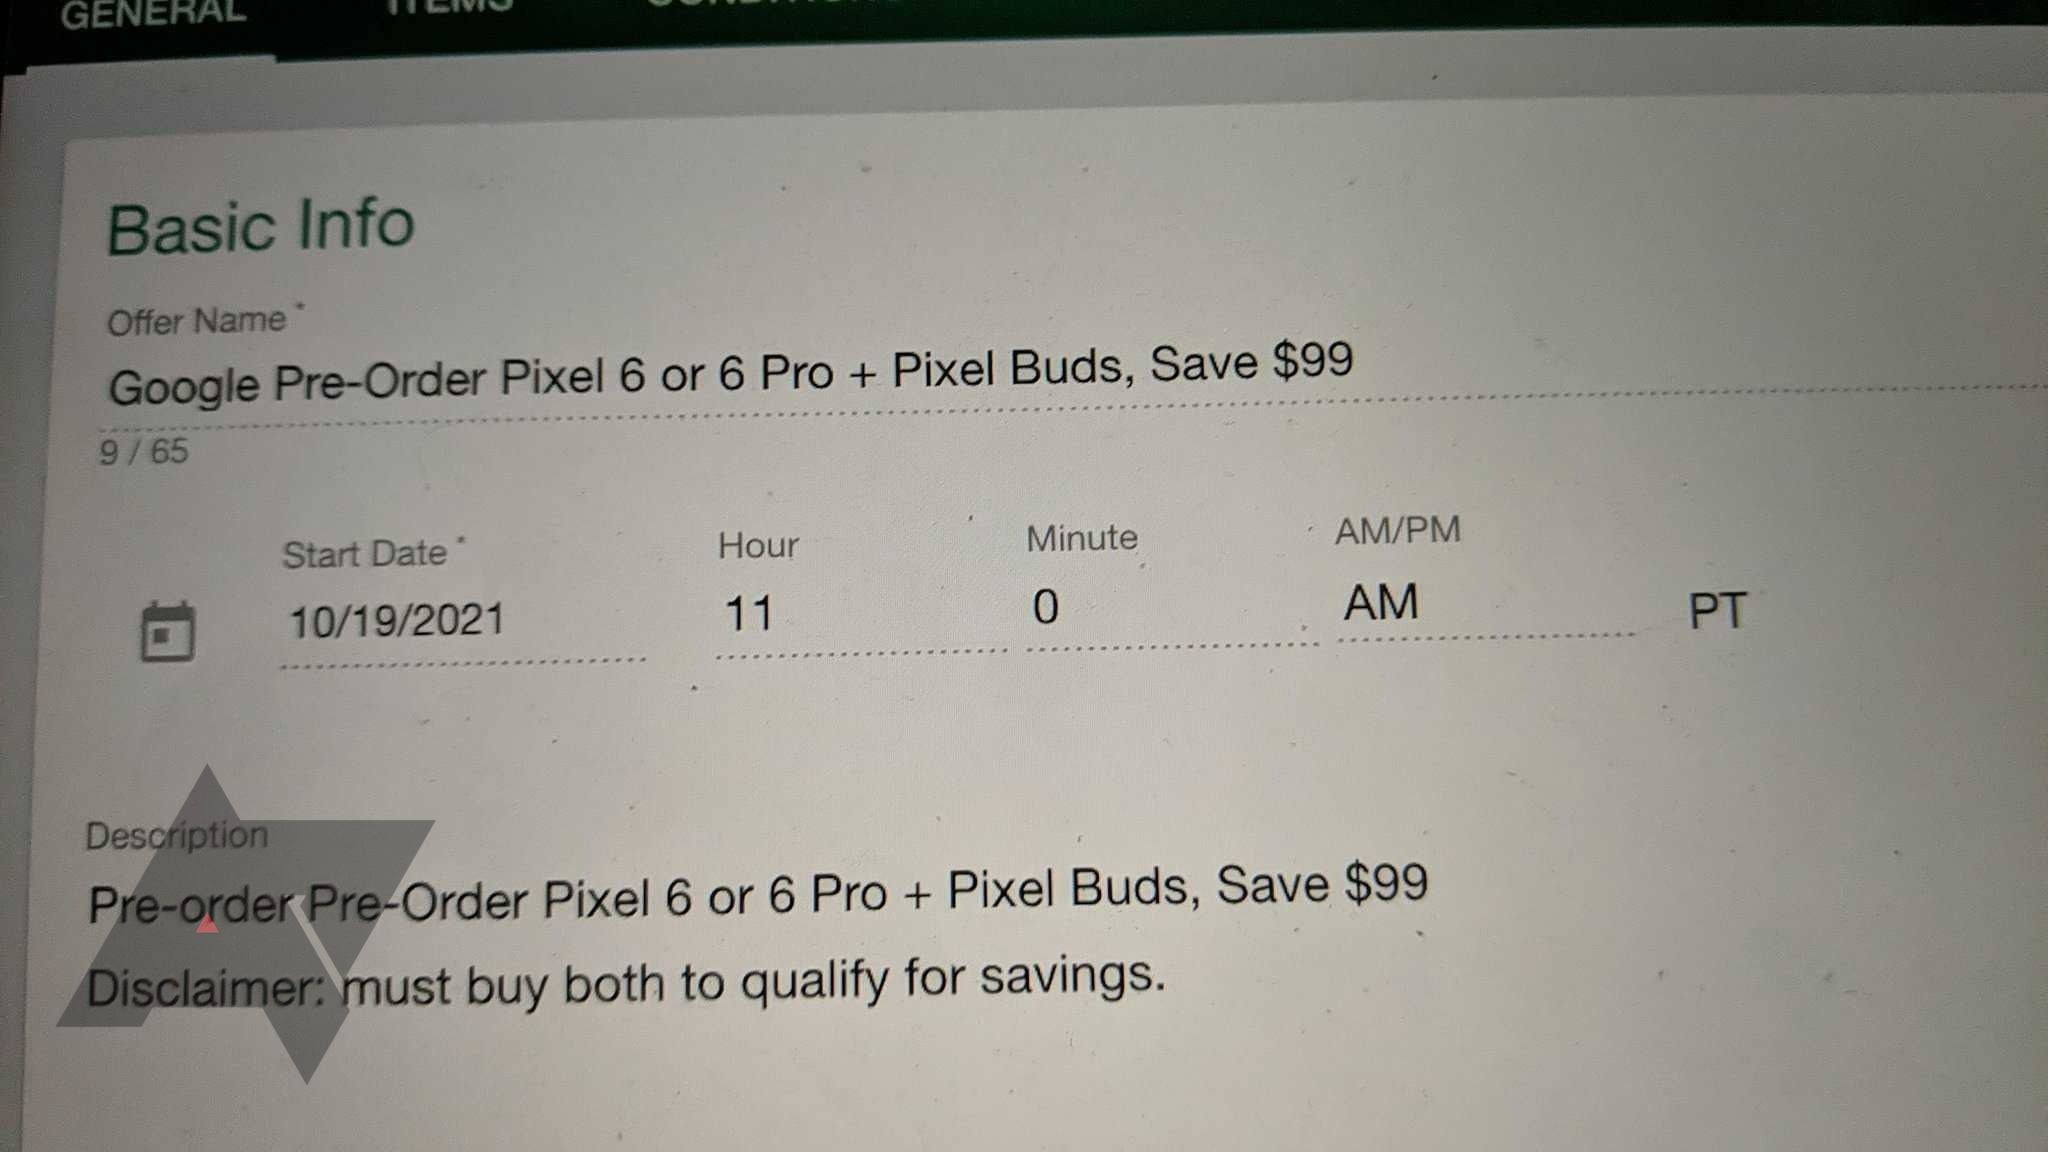 How to pre-order the Google Pixel 6 and Pixel 6 Pro